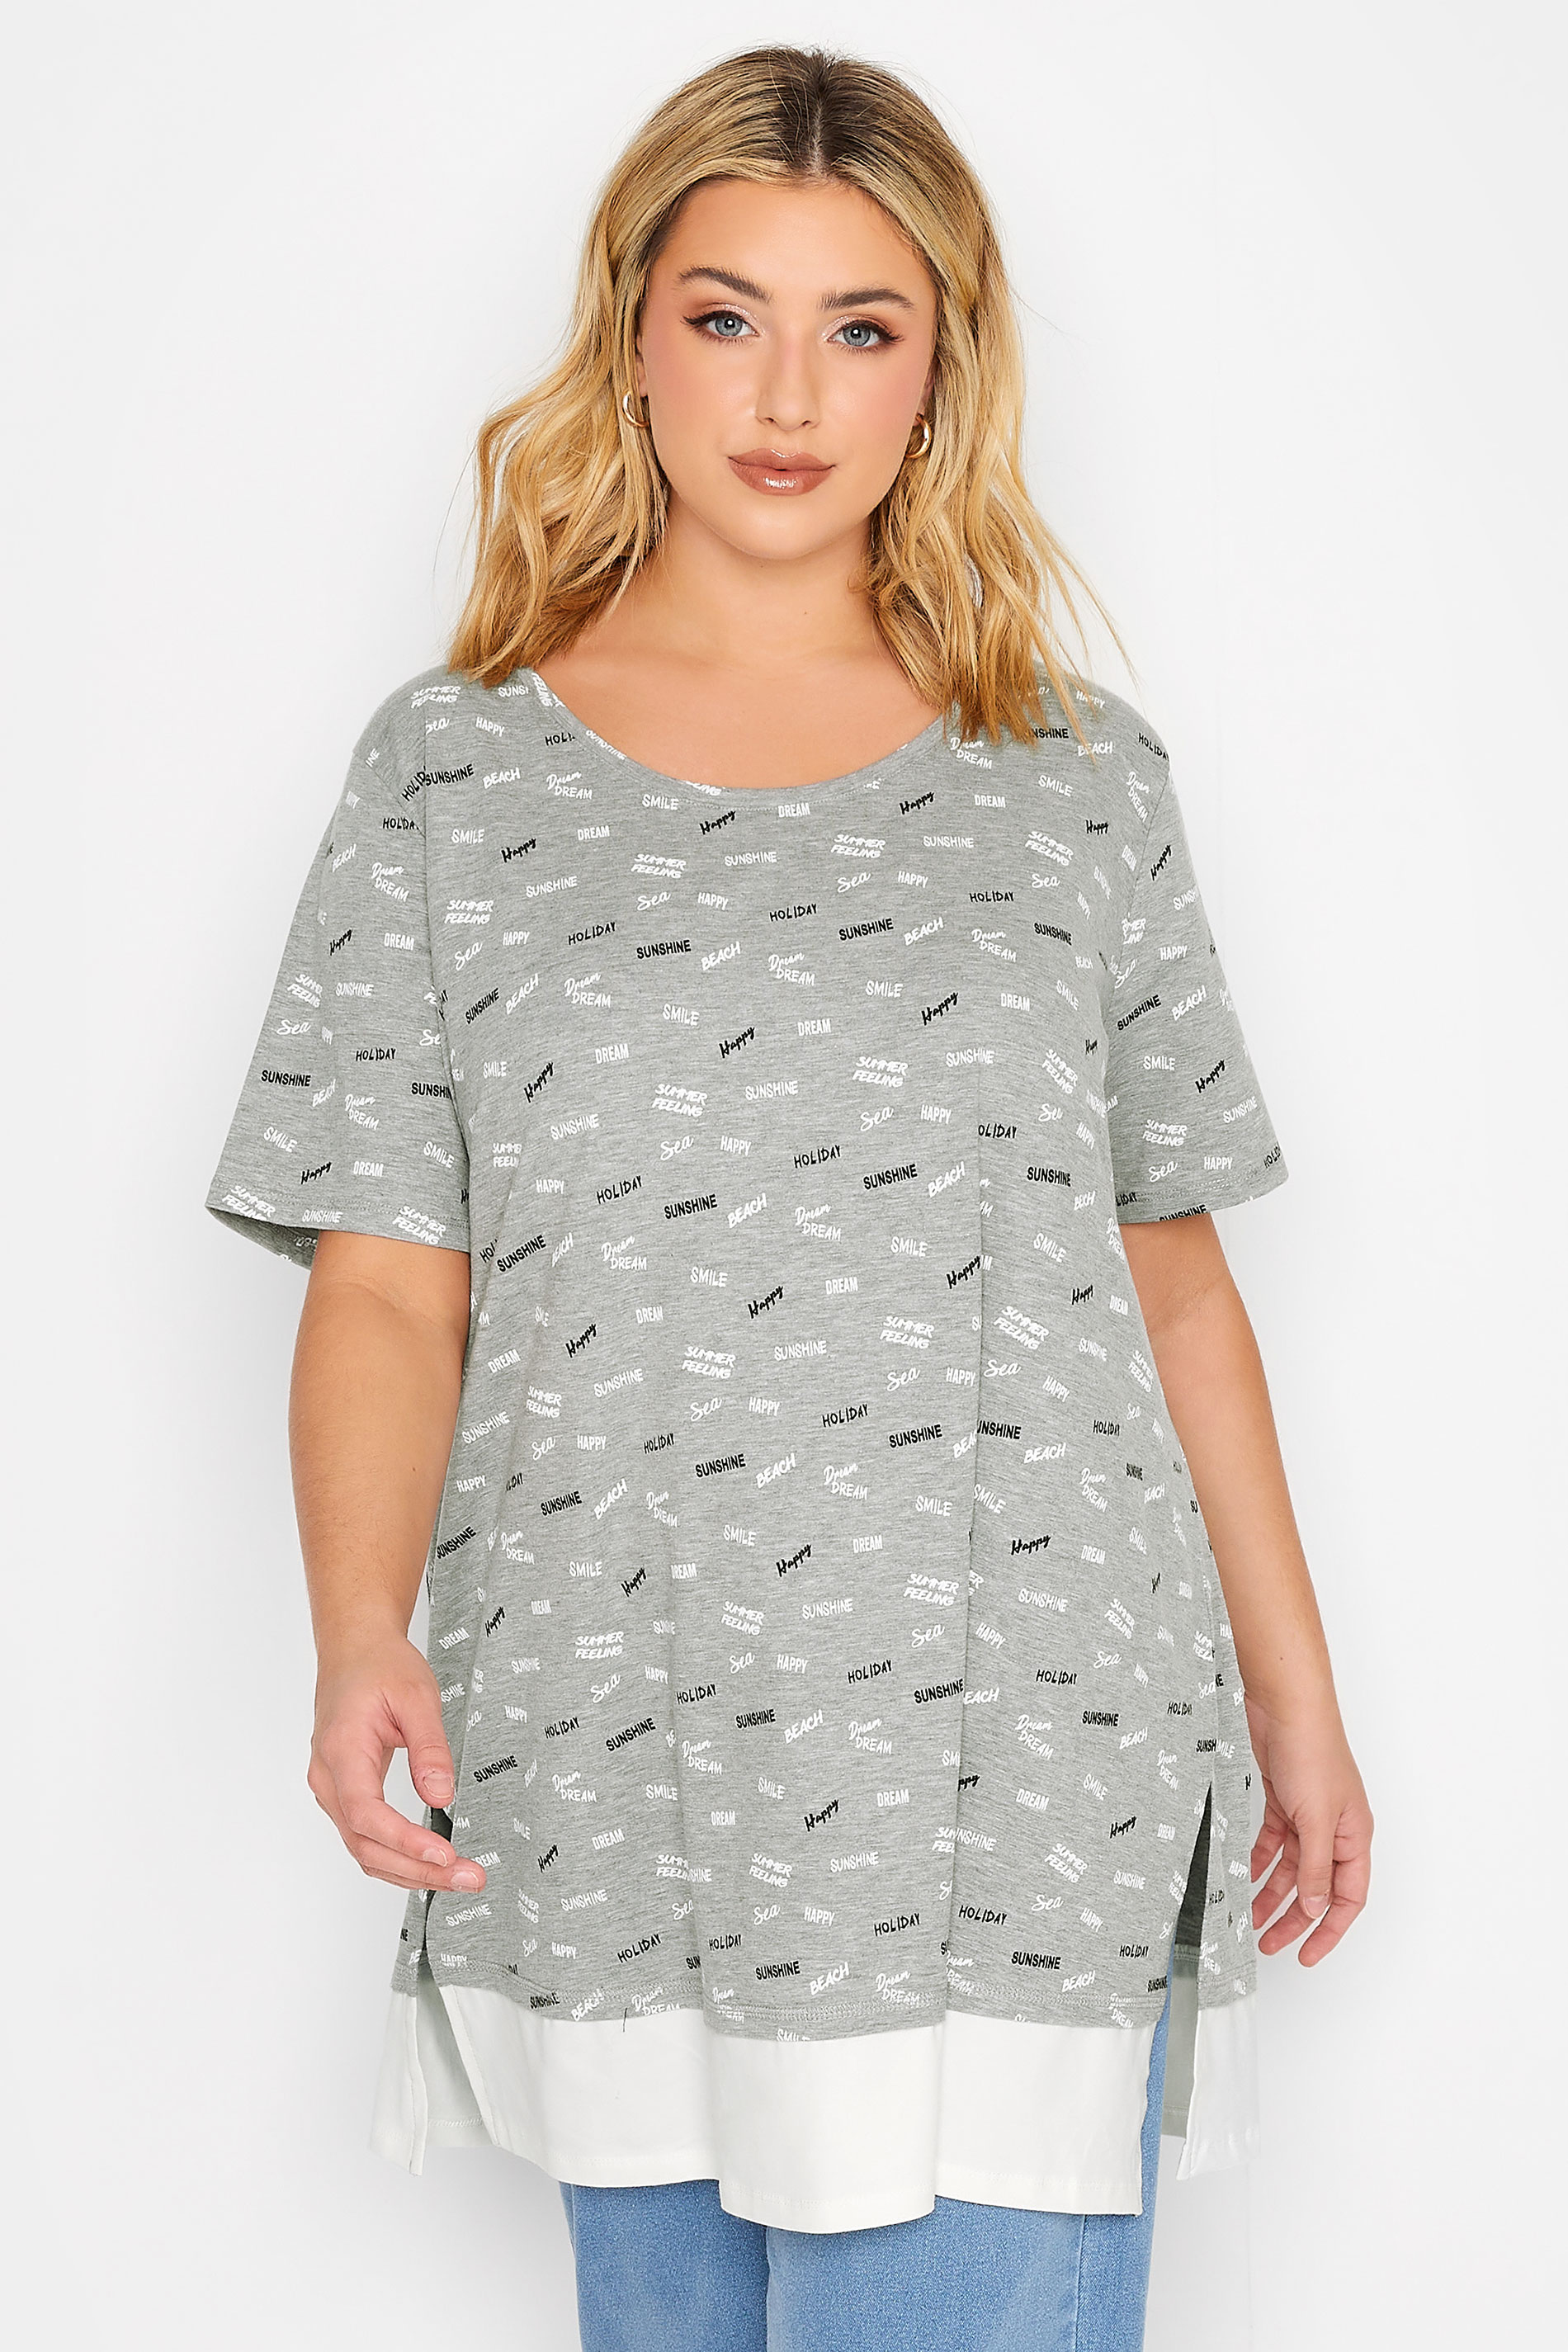 YOURS Plus Size Grey Summer Slogan Print Top | Yours Clothing 1